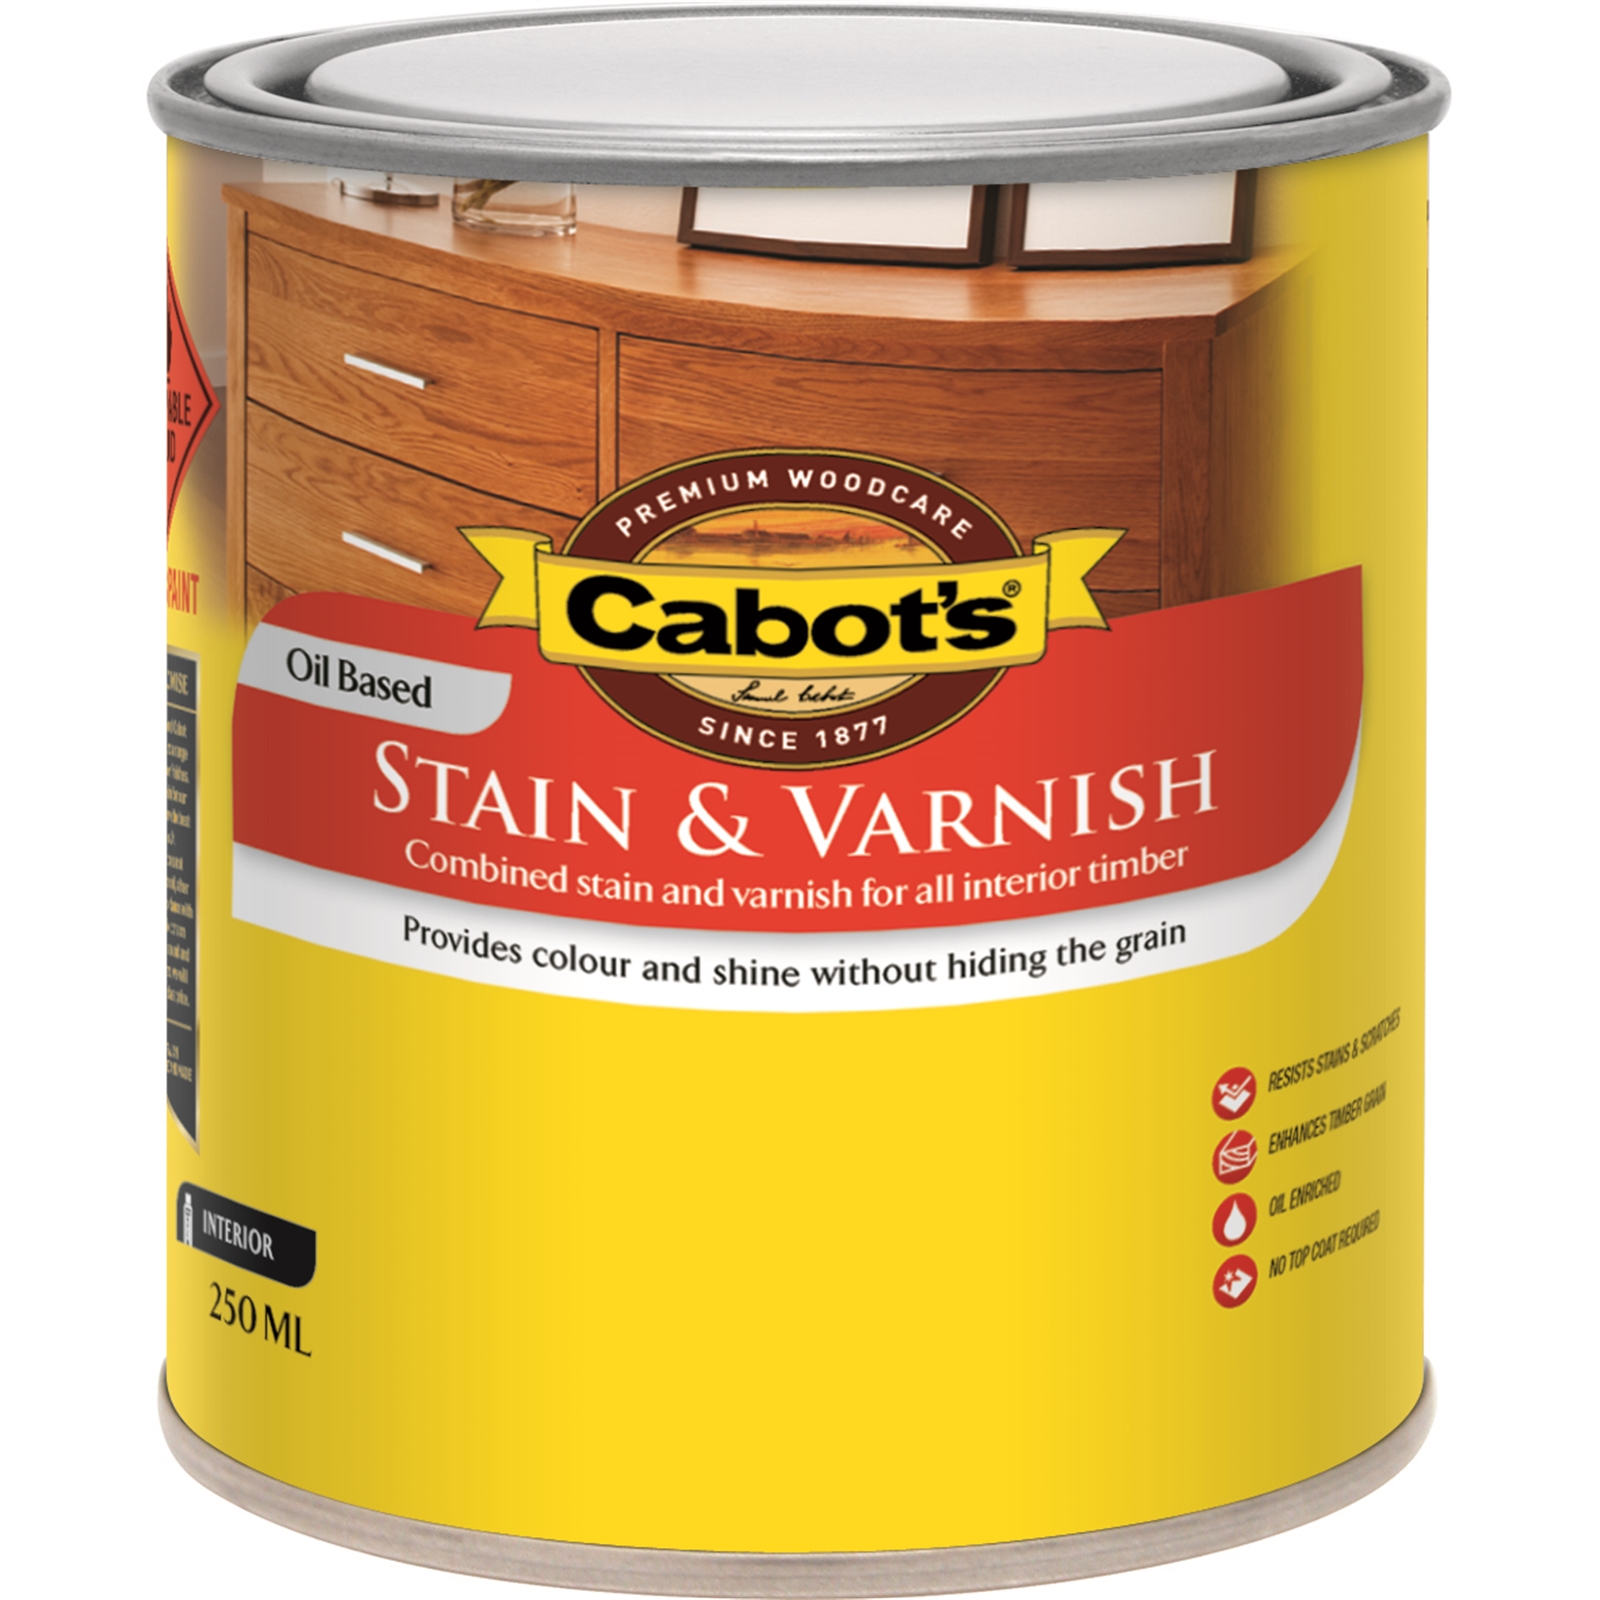 Cabot's 250ml Satin Oil Based Maple Stain and Varnish